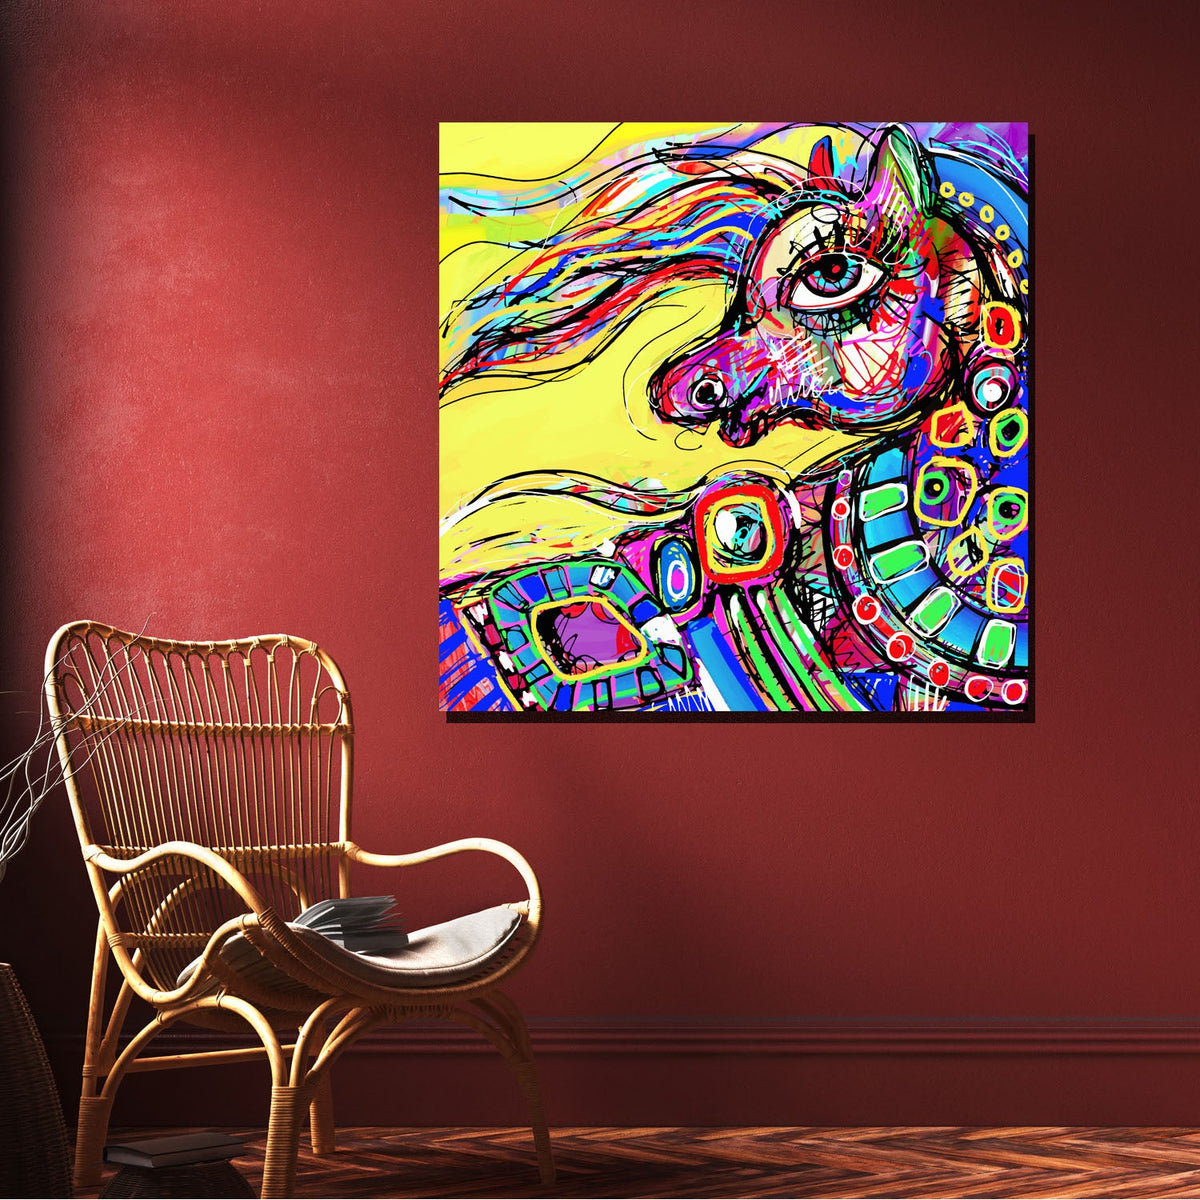 https://cdn.shopify.com/s/files/1/0387/9986/8044/products/AbstractHorseCanvasArtPrintStretched-3.jpg